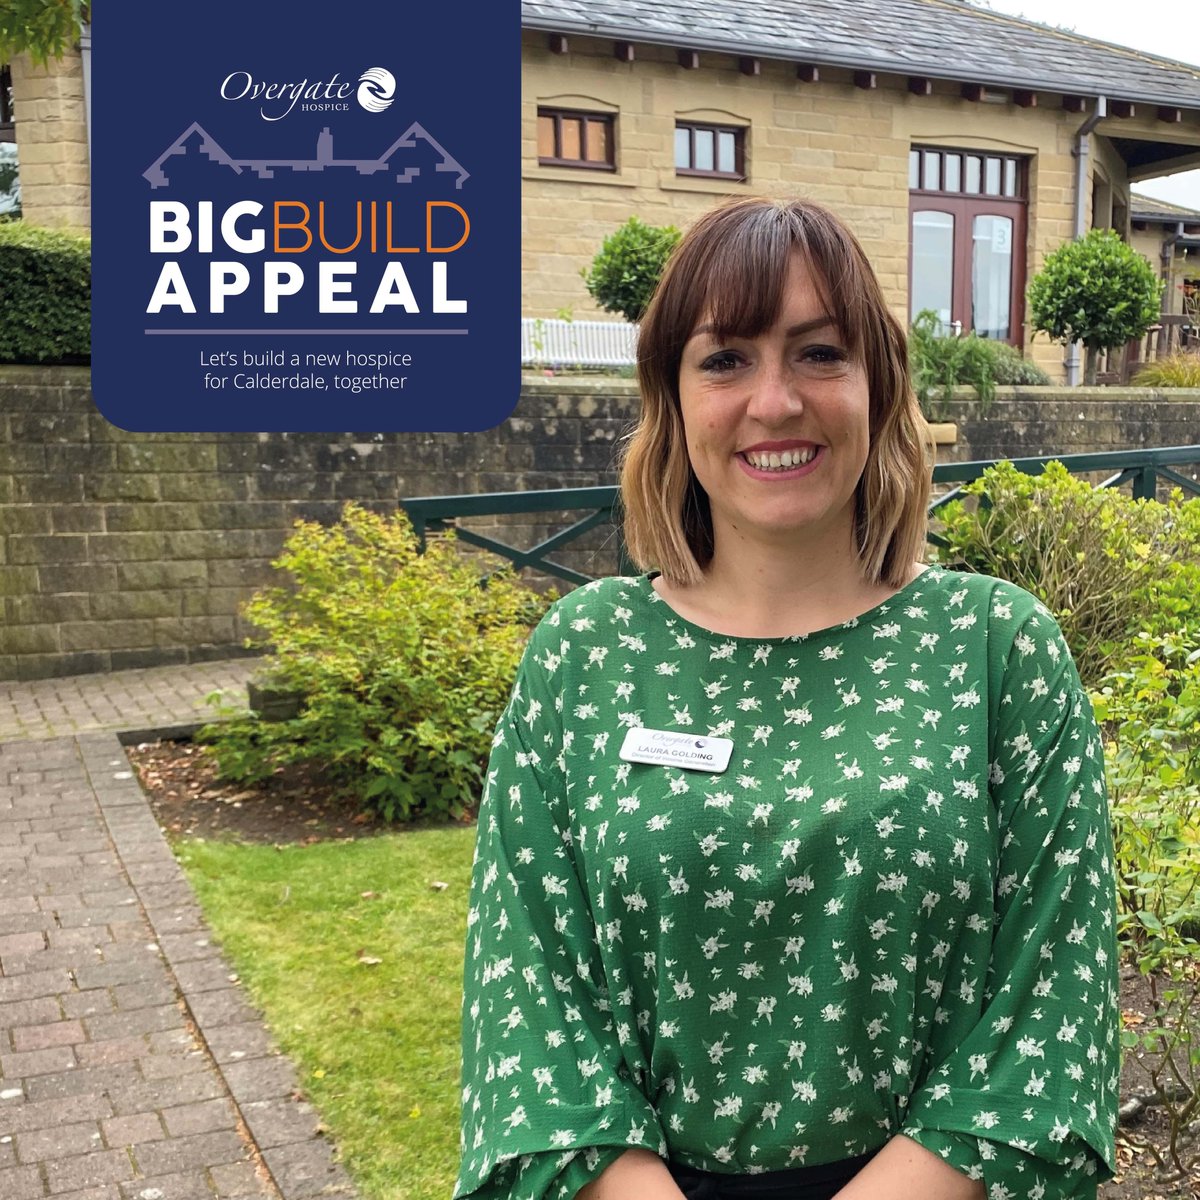 We’re kicking off our fundraising with our Foundations Appeal. Your support will help us prepare the site and lay the foundations for our new hospice. By donating to this appeal, you're not just giving; you're becoming a part of our journey. buff.ly/3vTSdgj